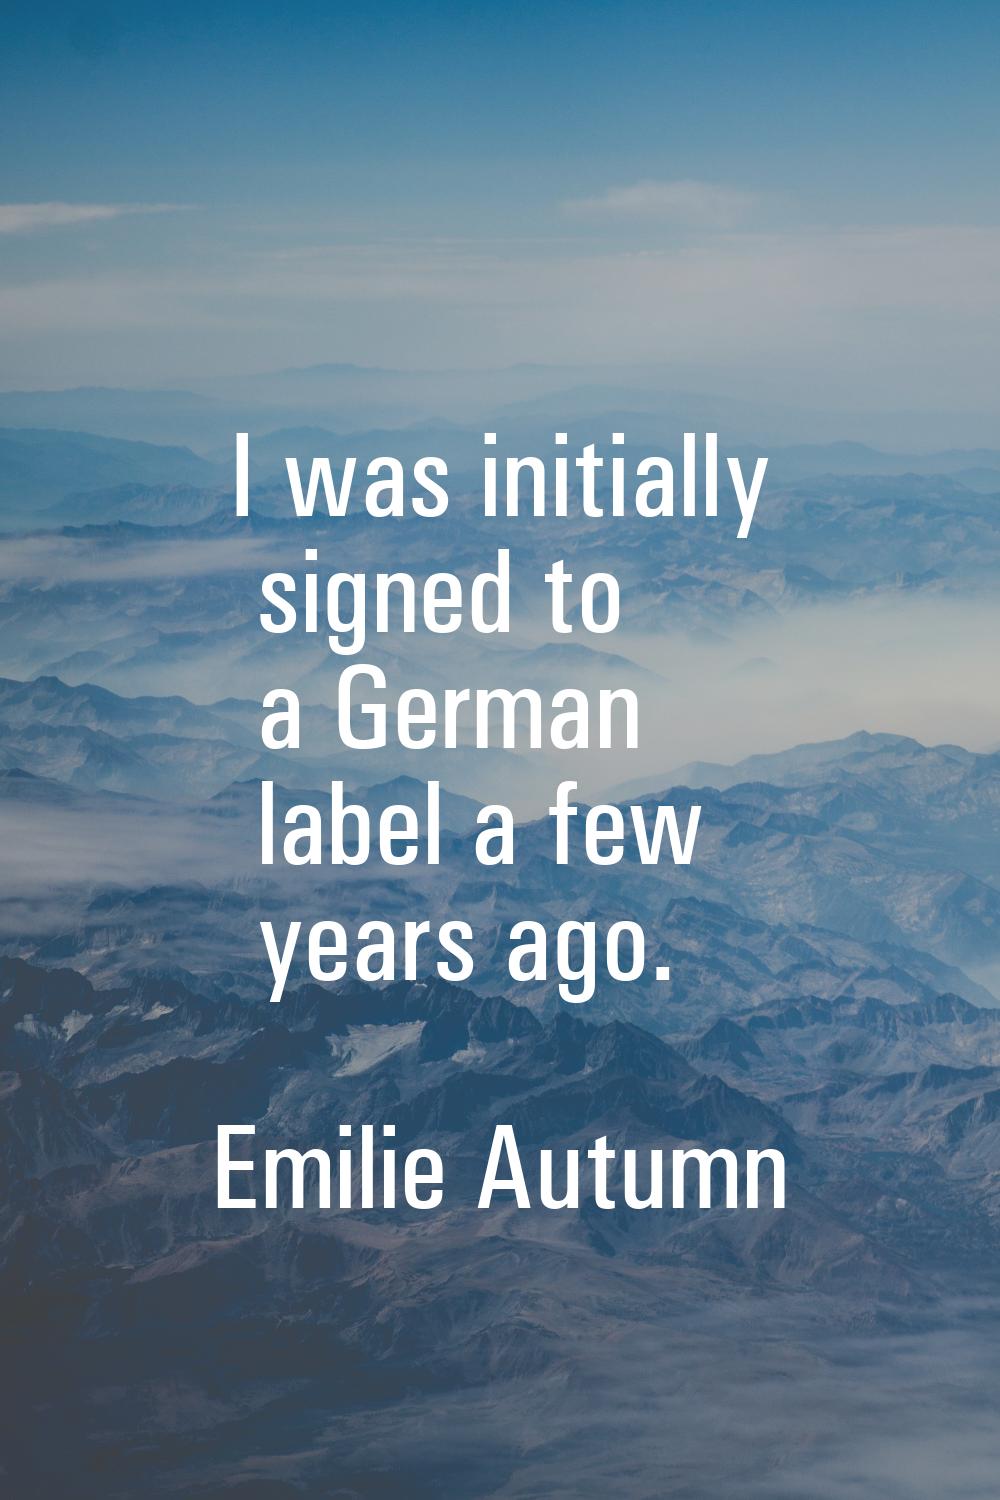 I was initially signed to a German label a few years ago.